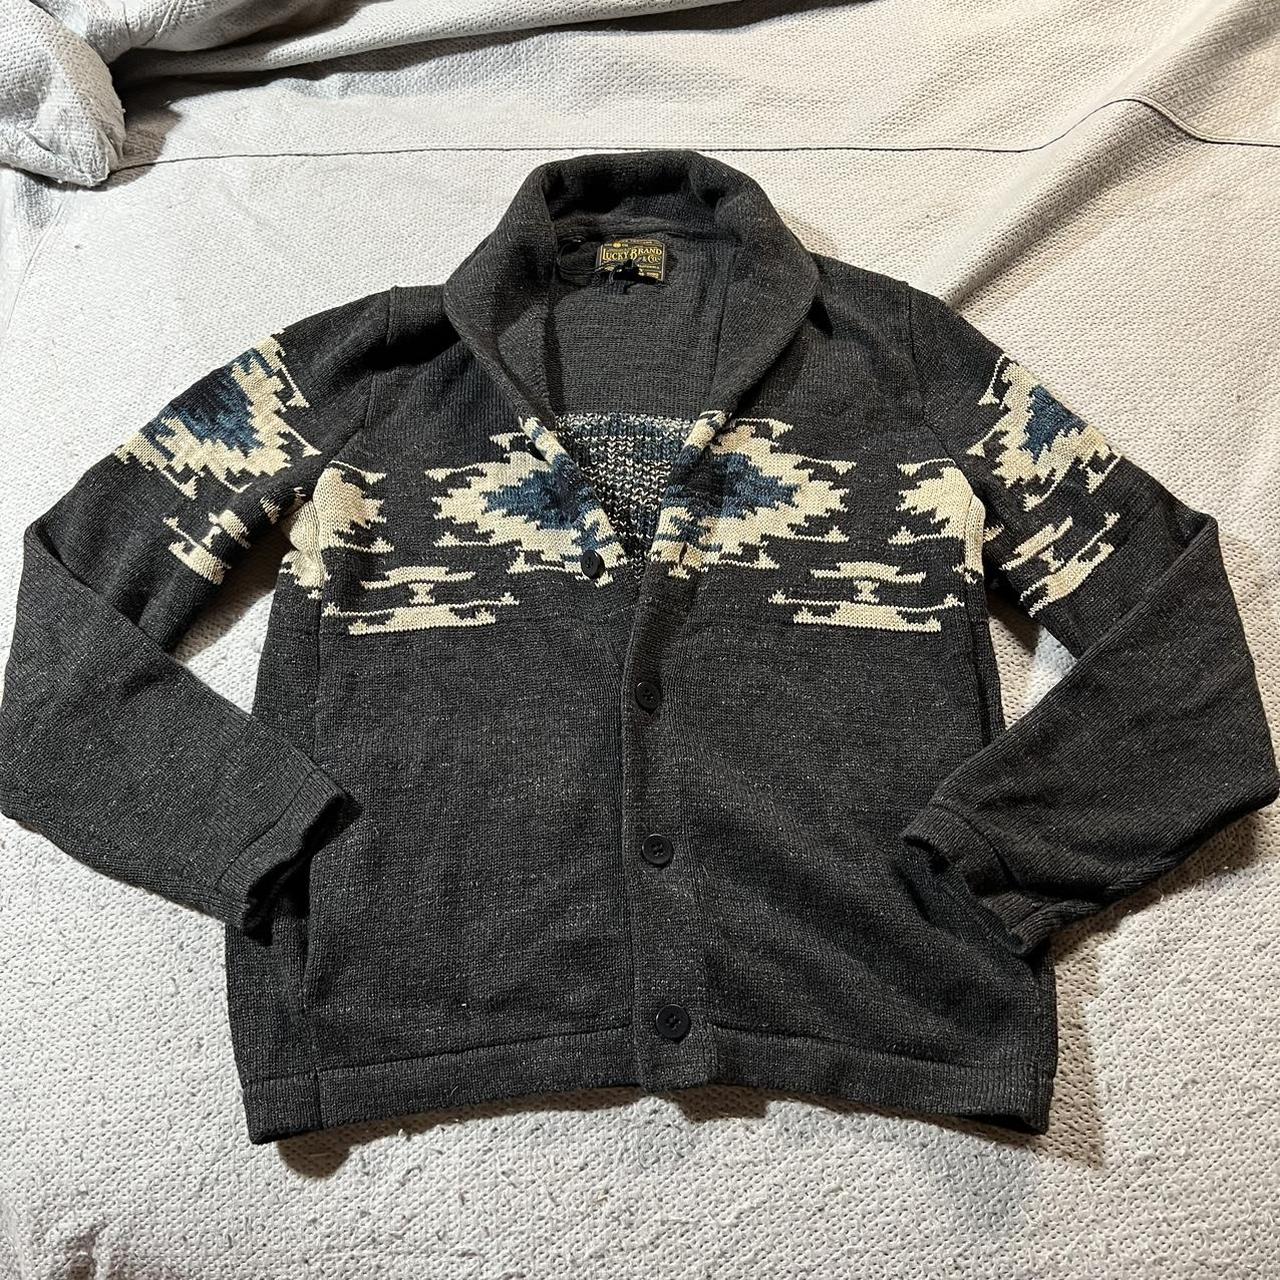 Lucky Brand Aztec Or Tribal Print Multi Color Gray Zip Up Hoodie